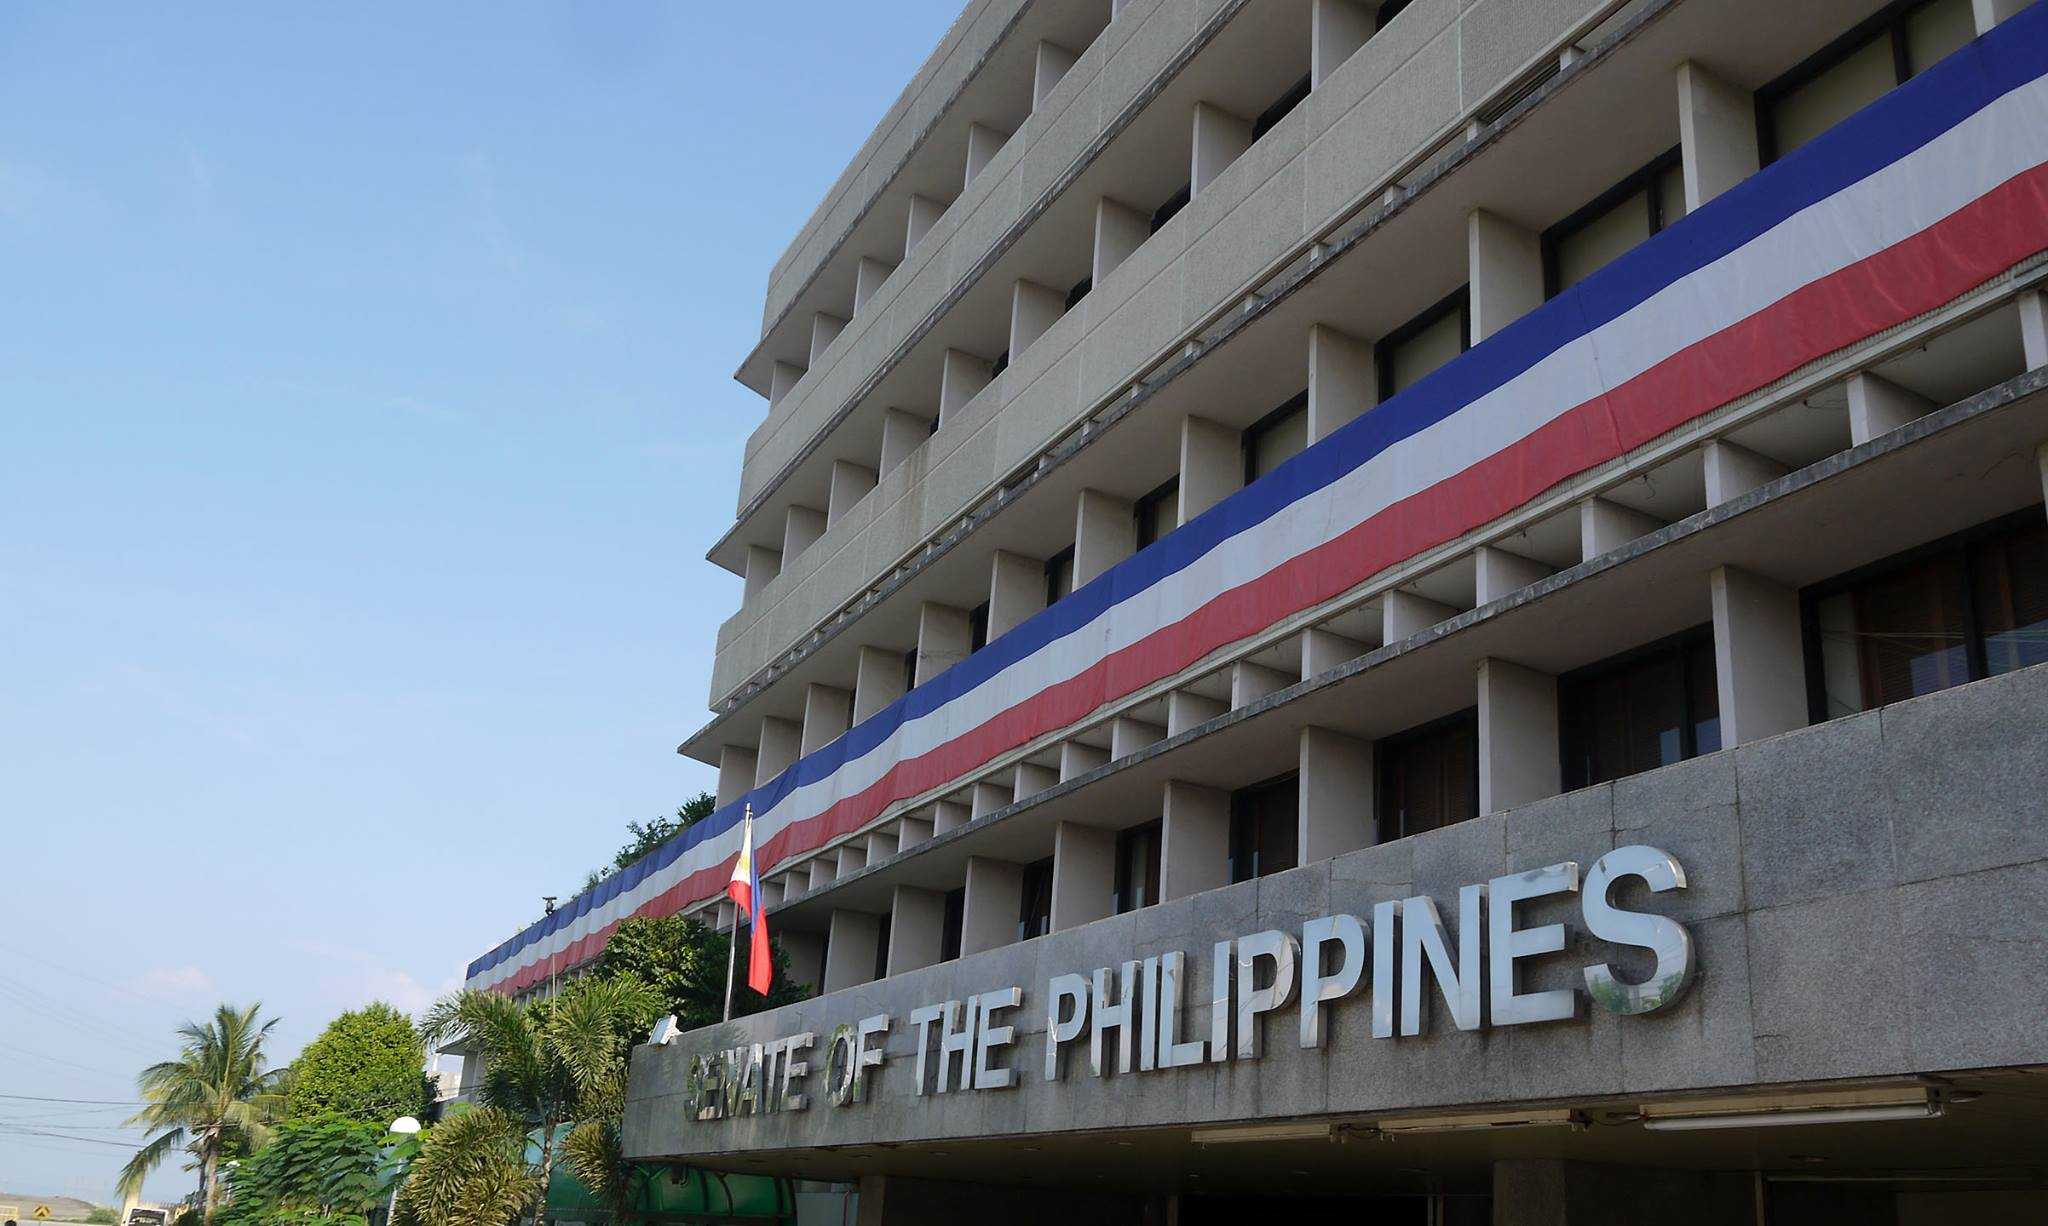 P100 daily wage hike bill gets nod from Senate